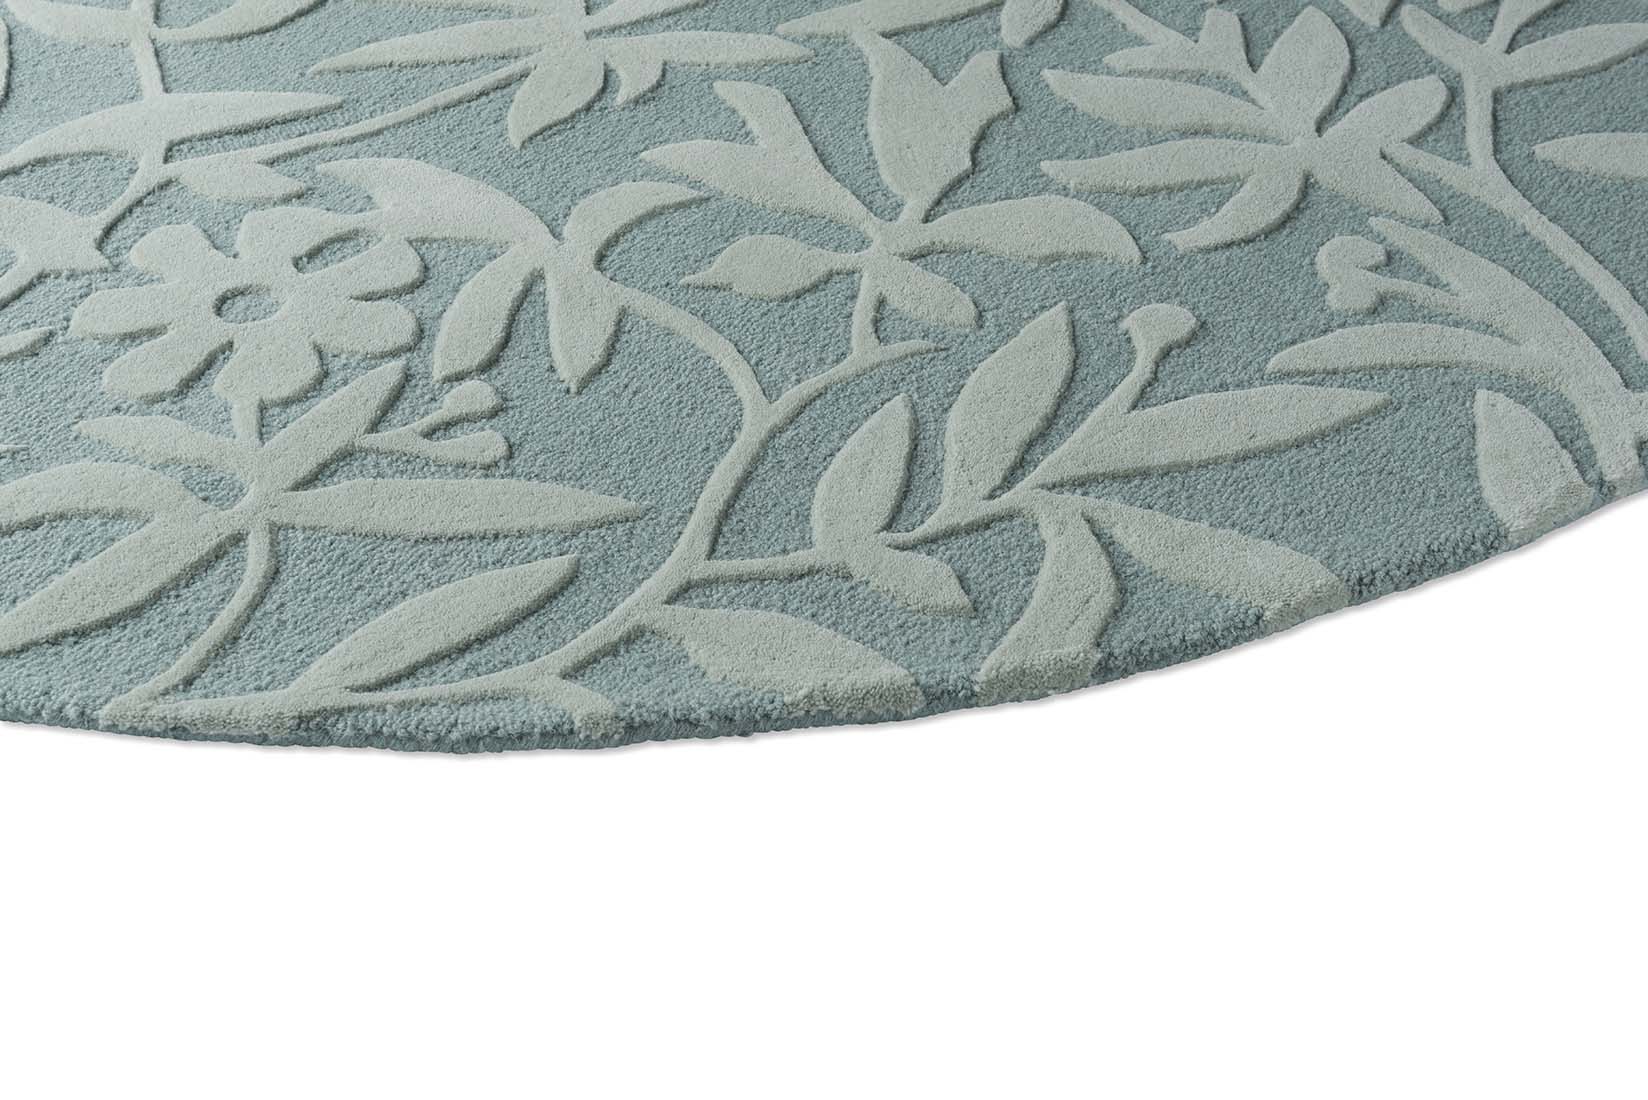 Green and blue wool circular rug with hand carved floral motifs
